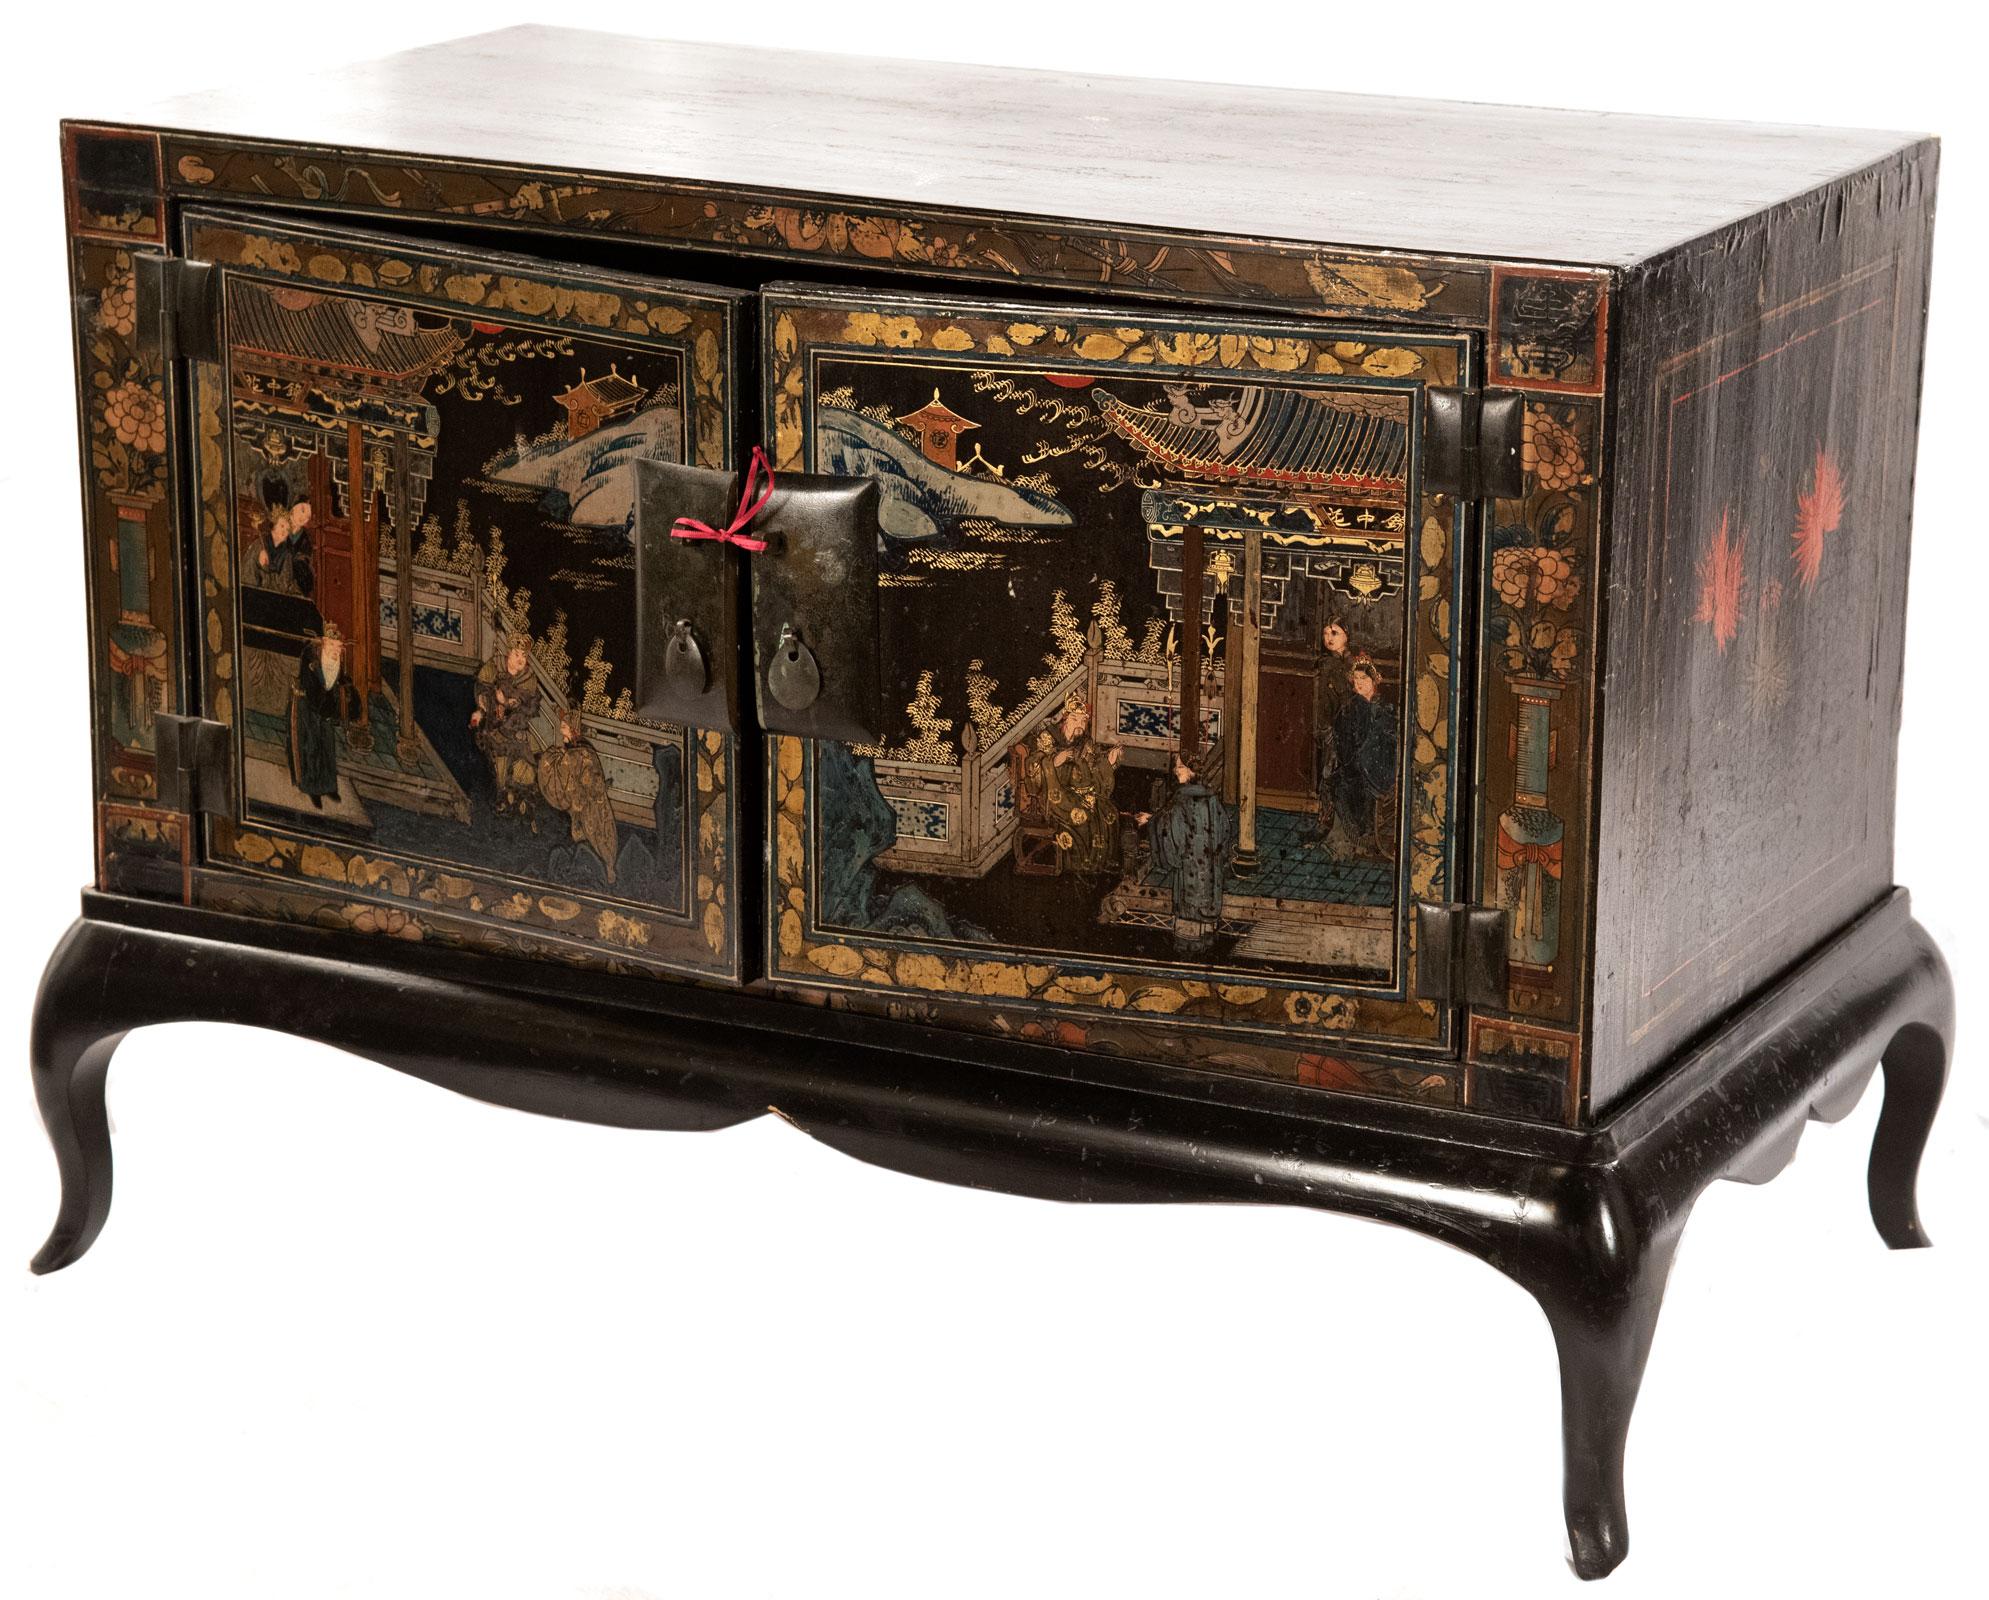 A pair of Chinese lacquered side table cabinets with scenes of courtly life in black, green, red and white on the exterior and red on the interior, circa 1920.